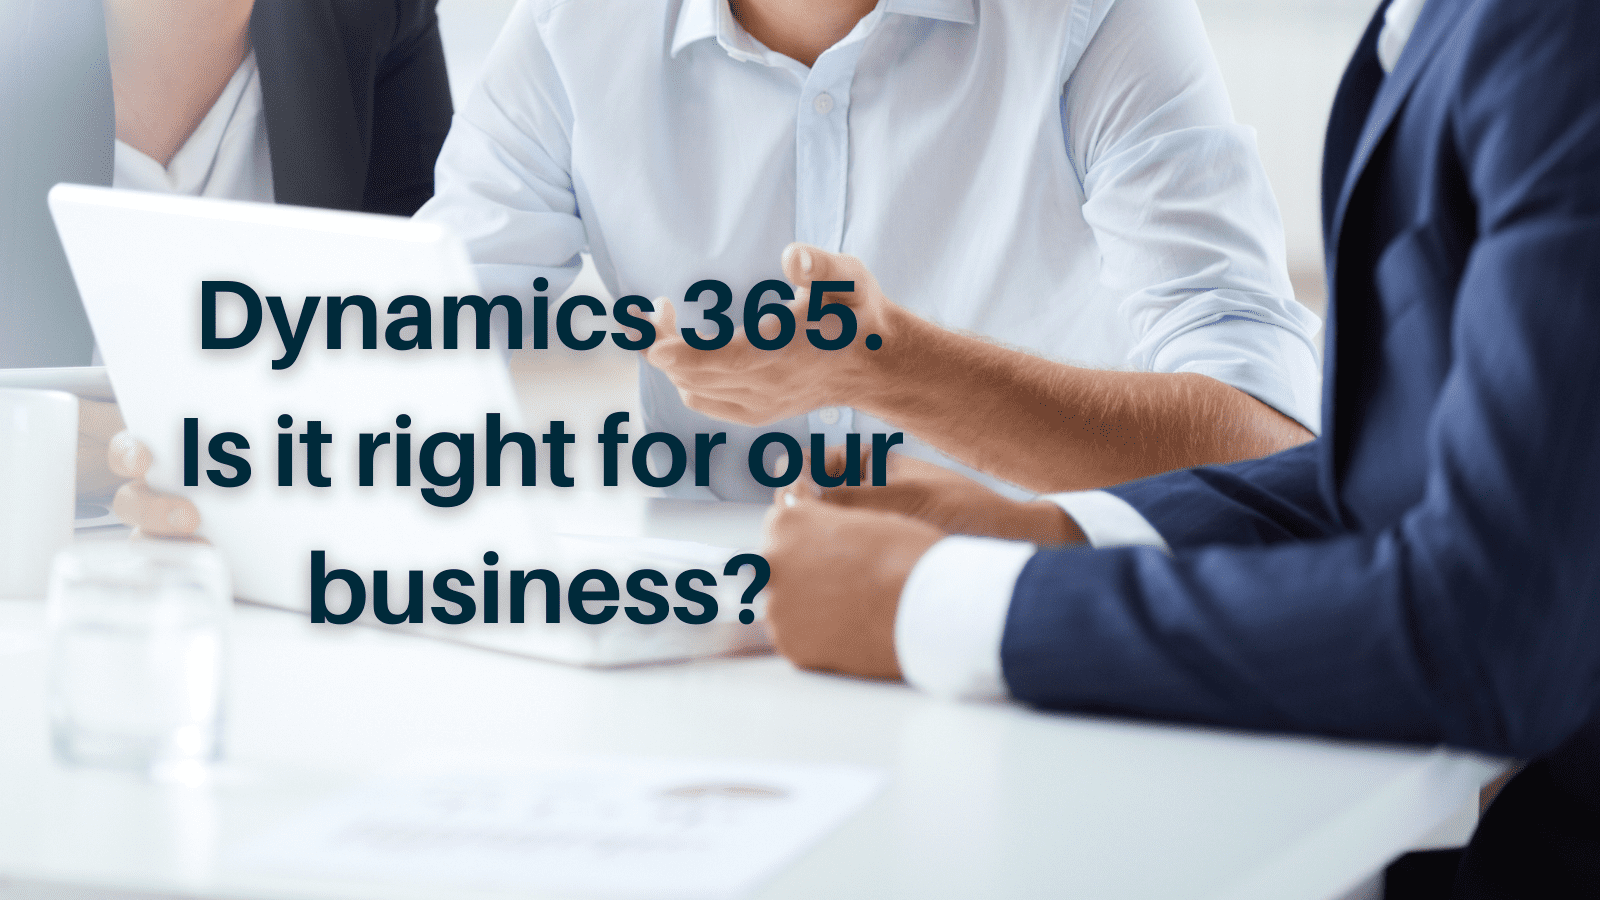 IsMicrosoft Dynamics 365 right for your business?